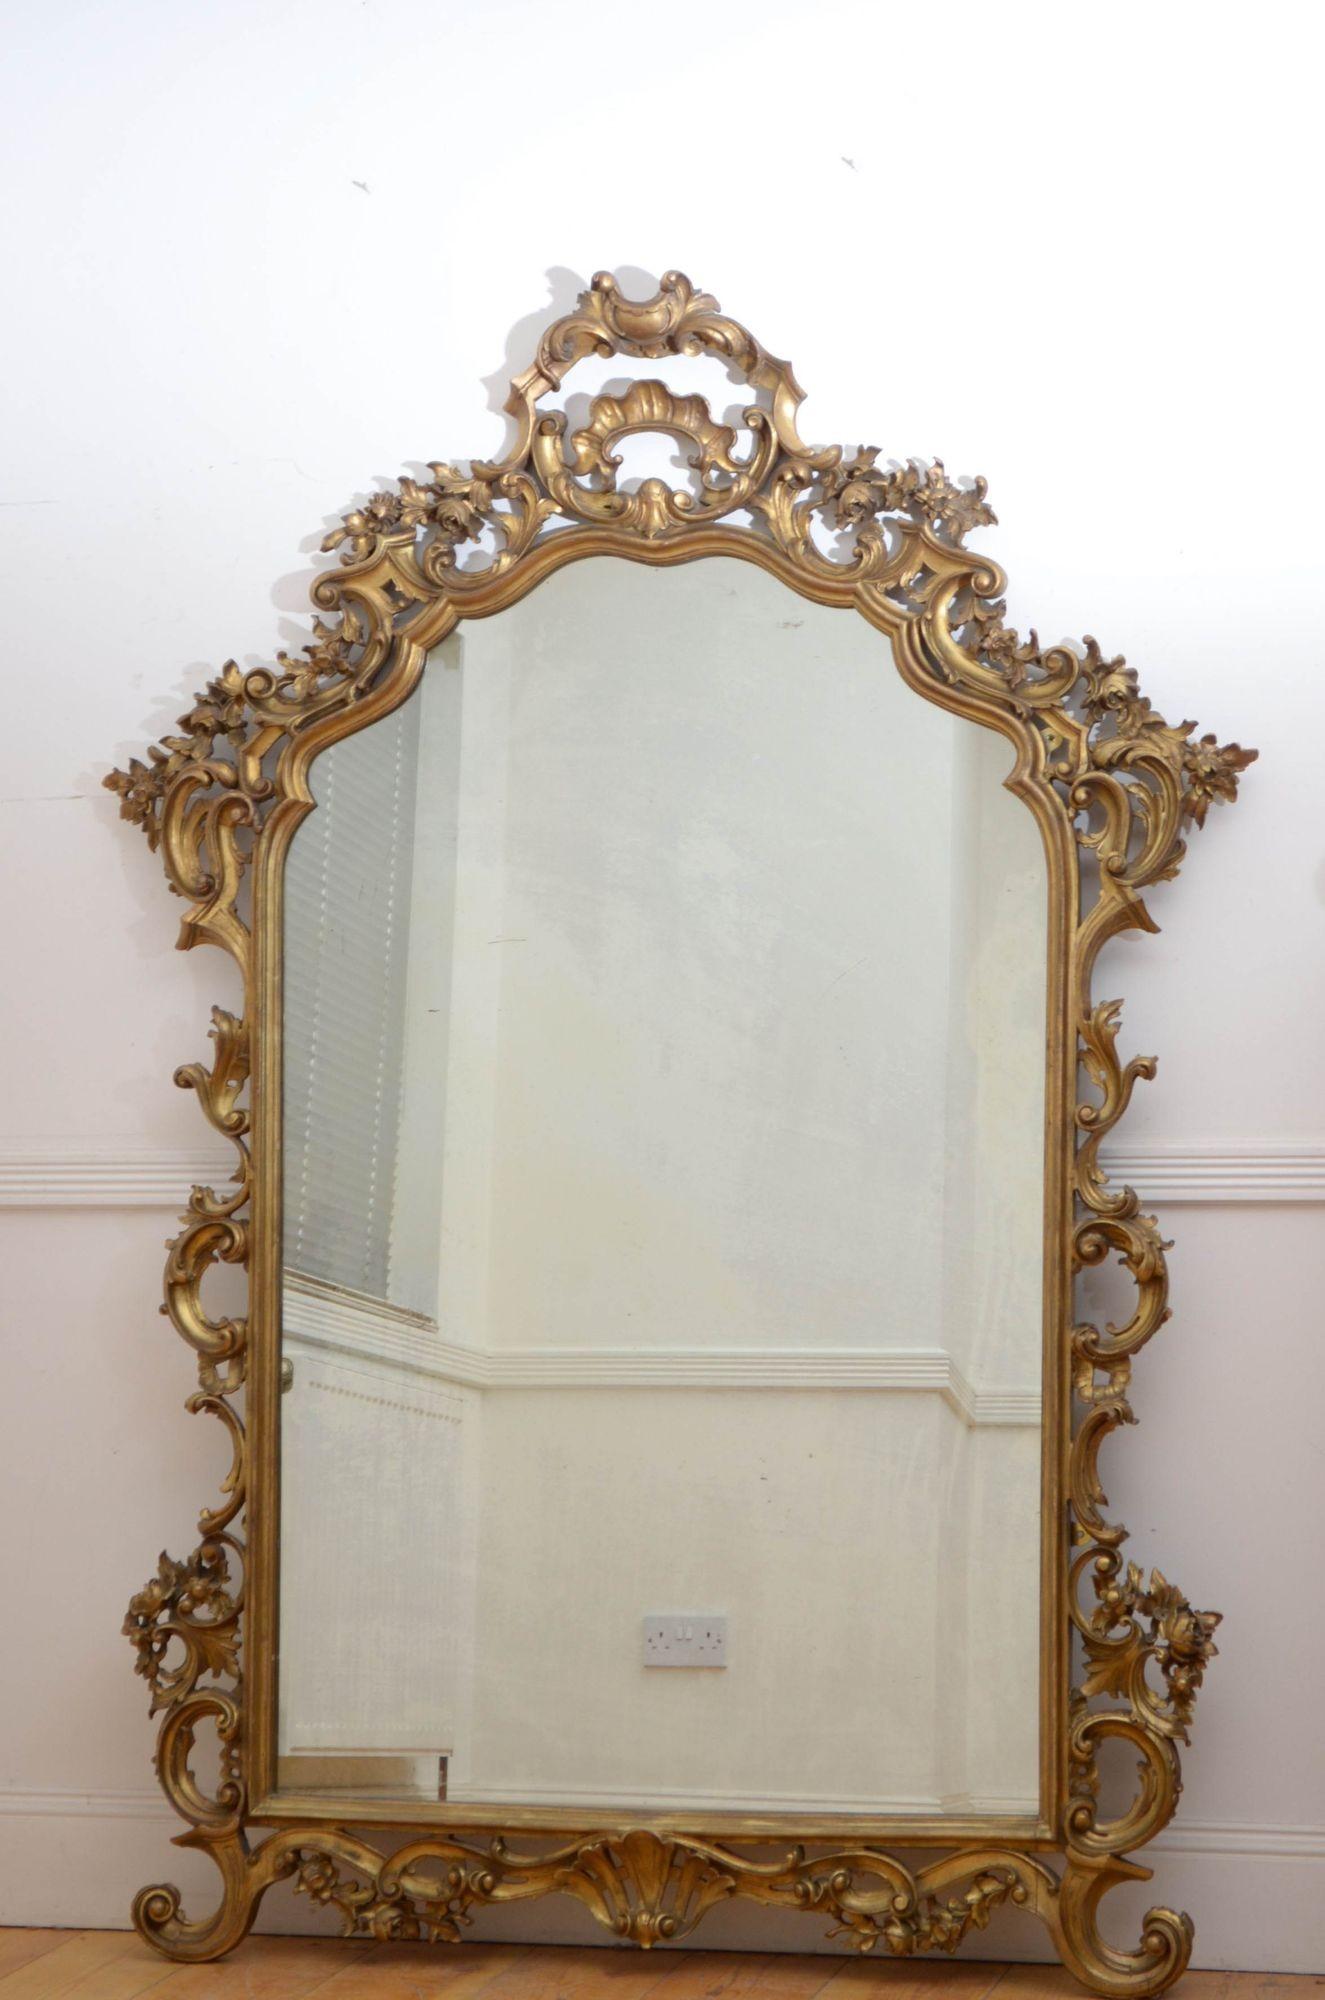 Sn5440 Superb large 19th century Italian leaner mirror or wall mirror, having original glass with some foxing and minor imperfections in wood carved frame, decorated with scrolls, leaves , shells and flowers. This antique gilt mirror is in home